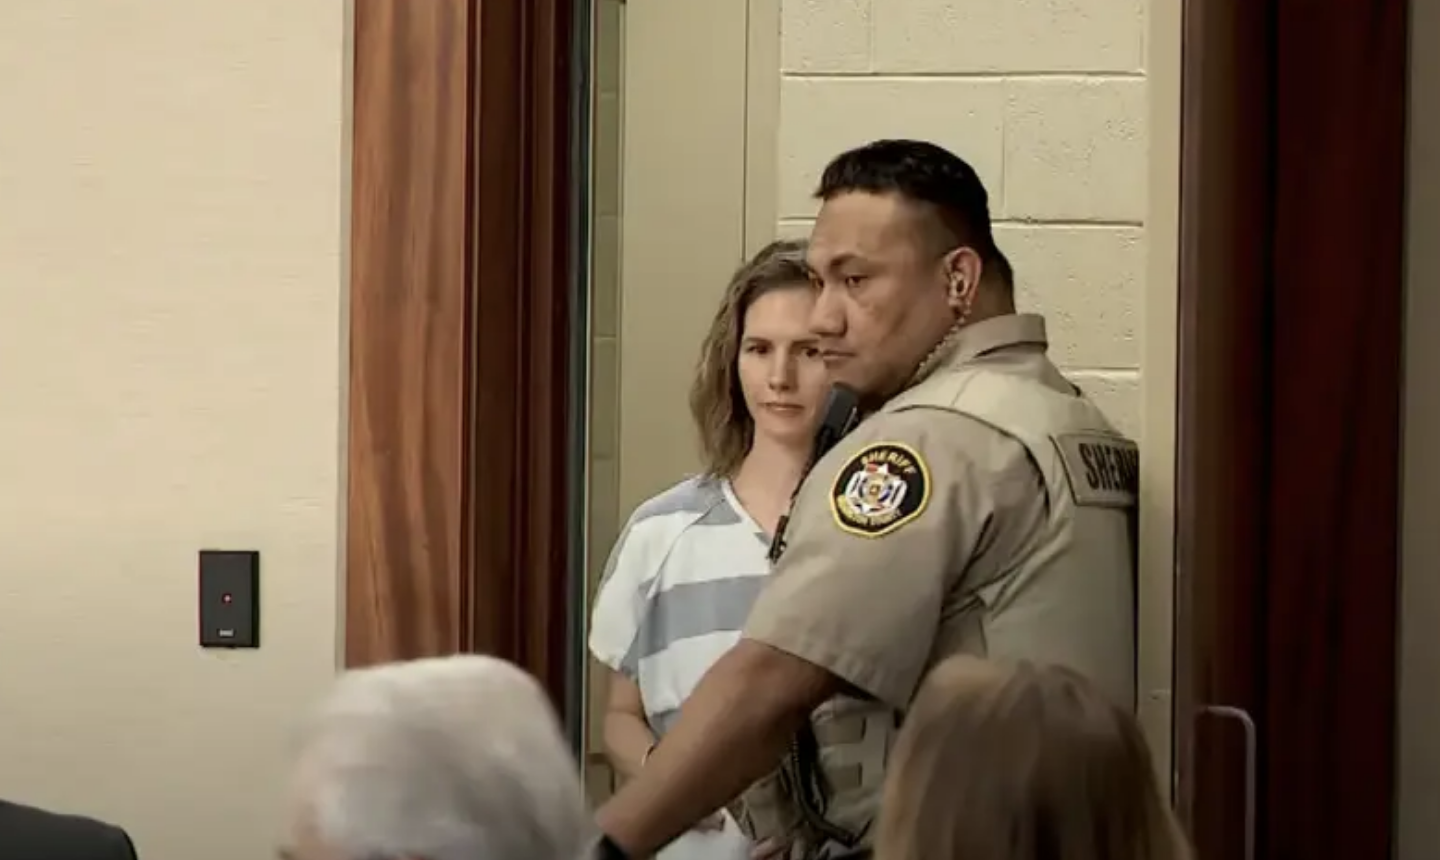 Ruby in a striped uniform stands next to a law enforcement officer in a courtroom